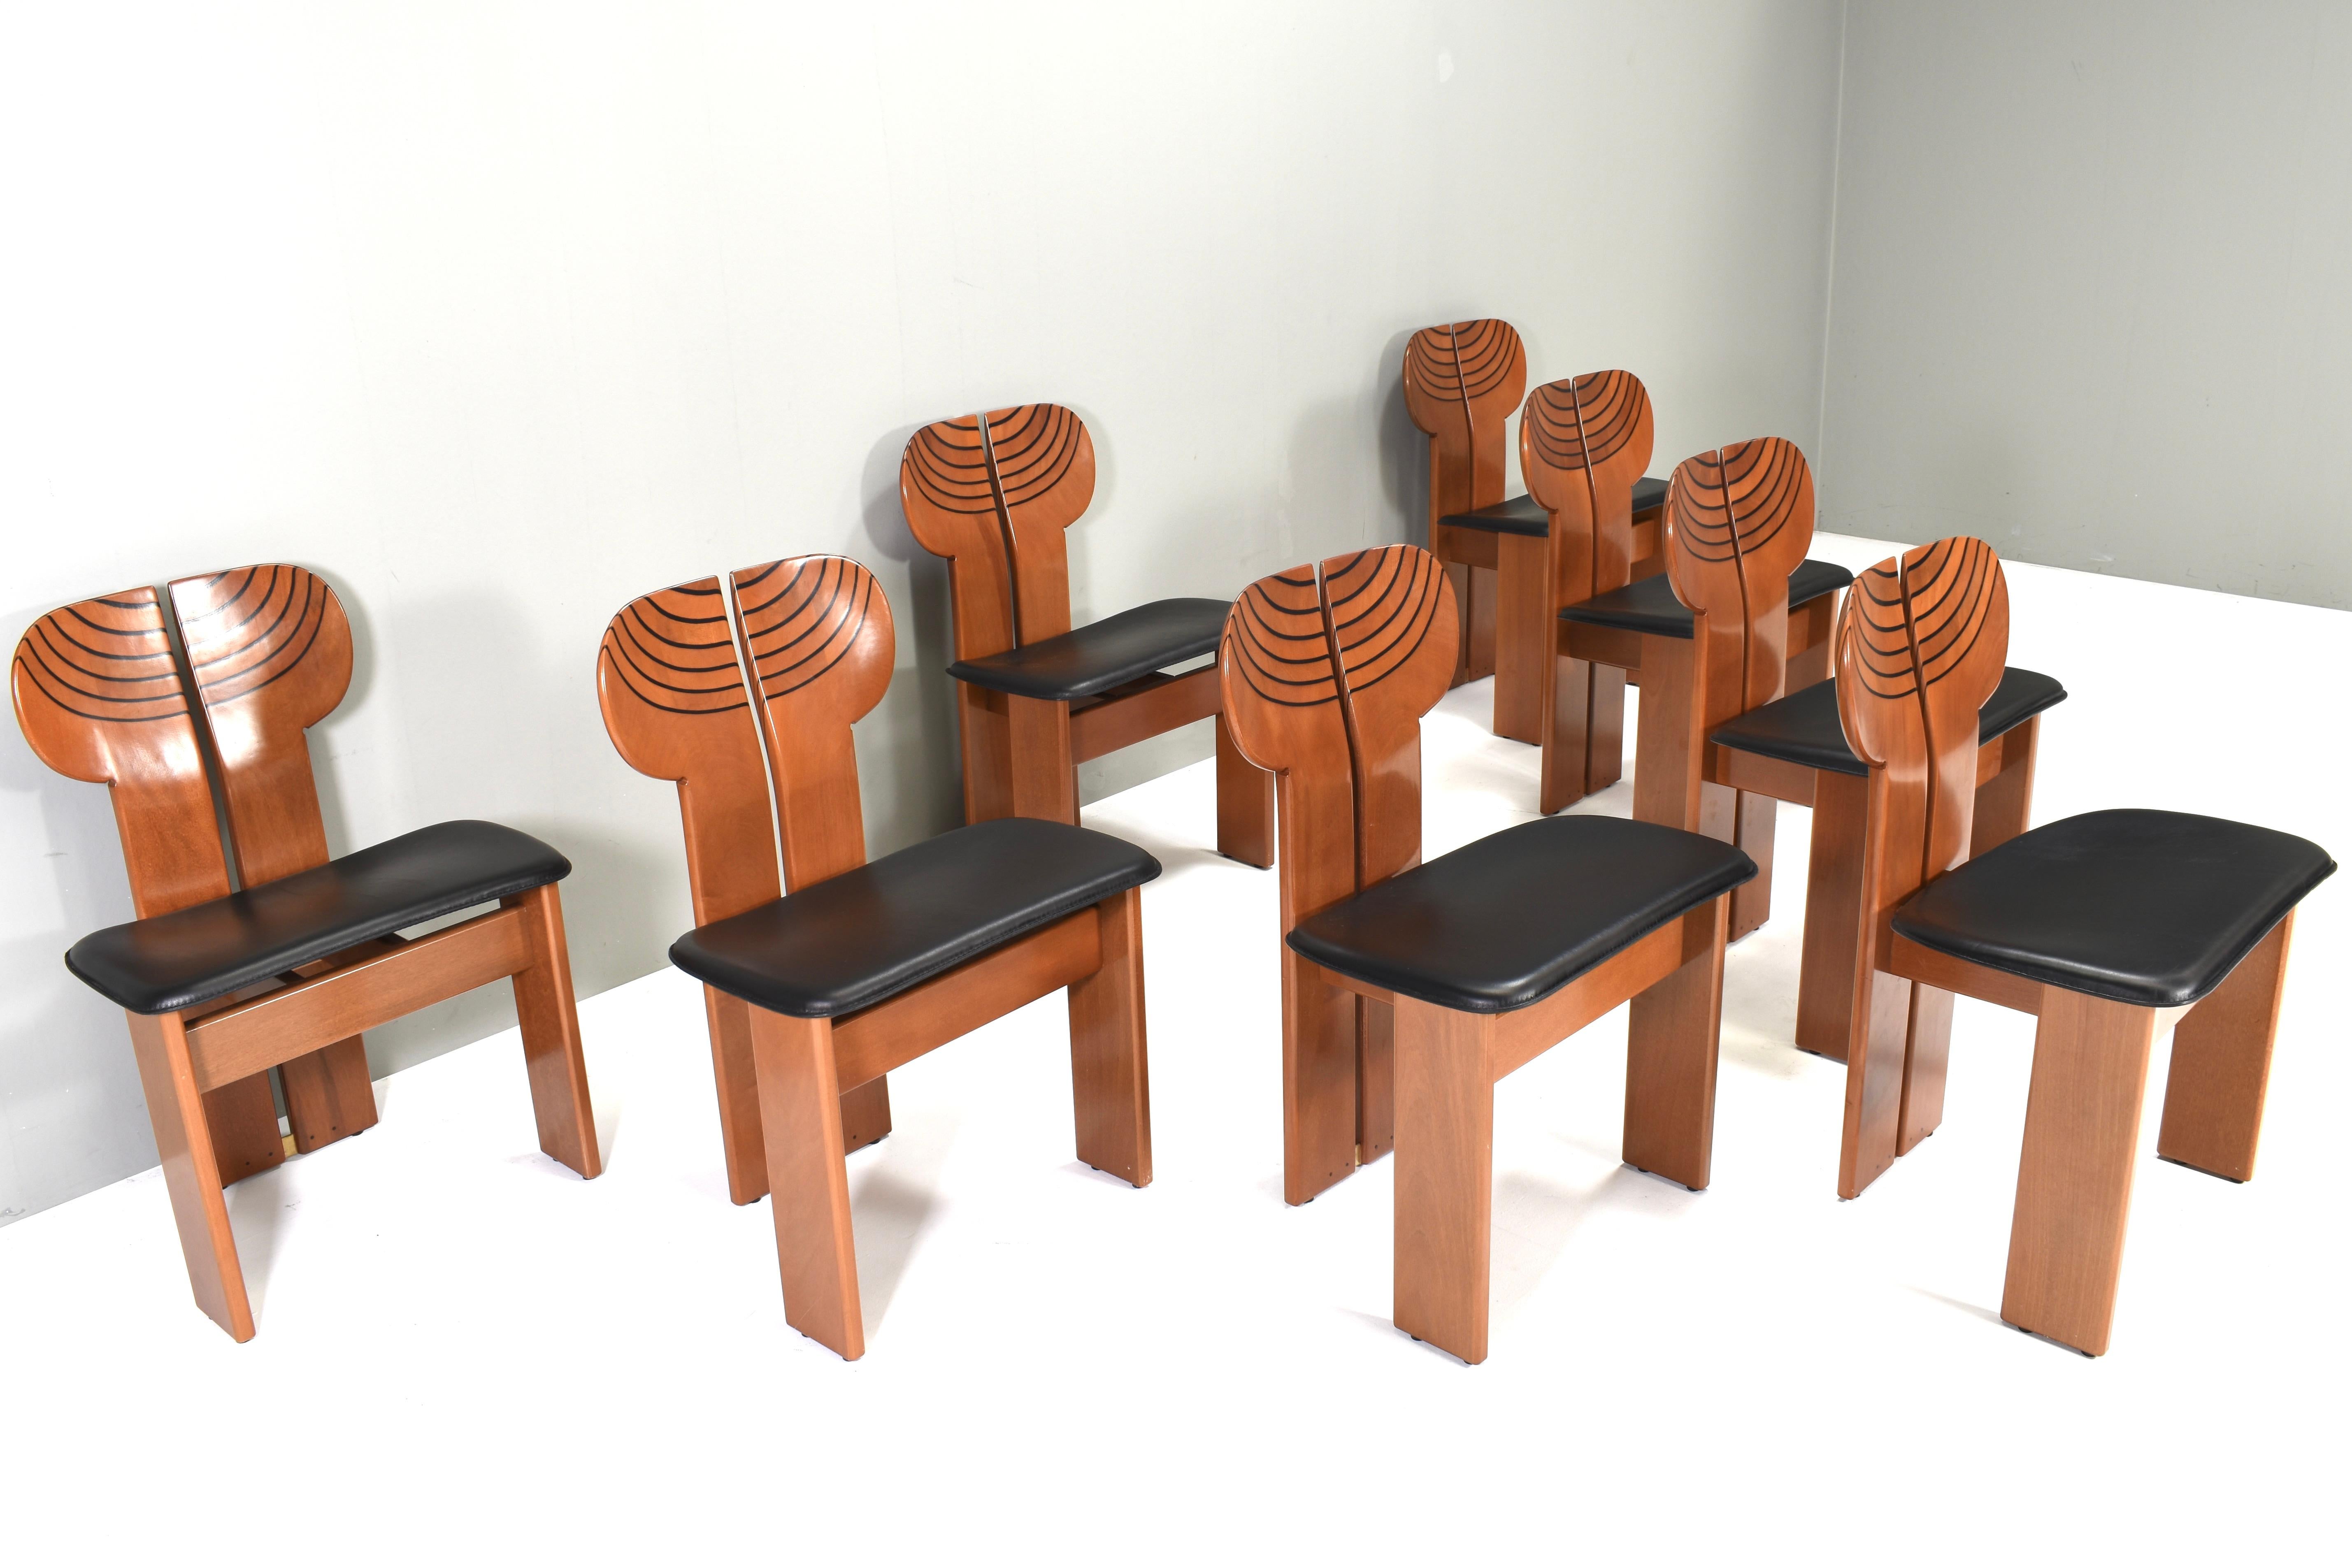 Mid-Century Modern Africa Chairs by Afra & Tobia Scarpa for Maxalto, Italy - 1975, set of 8  For Sale